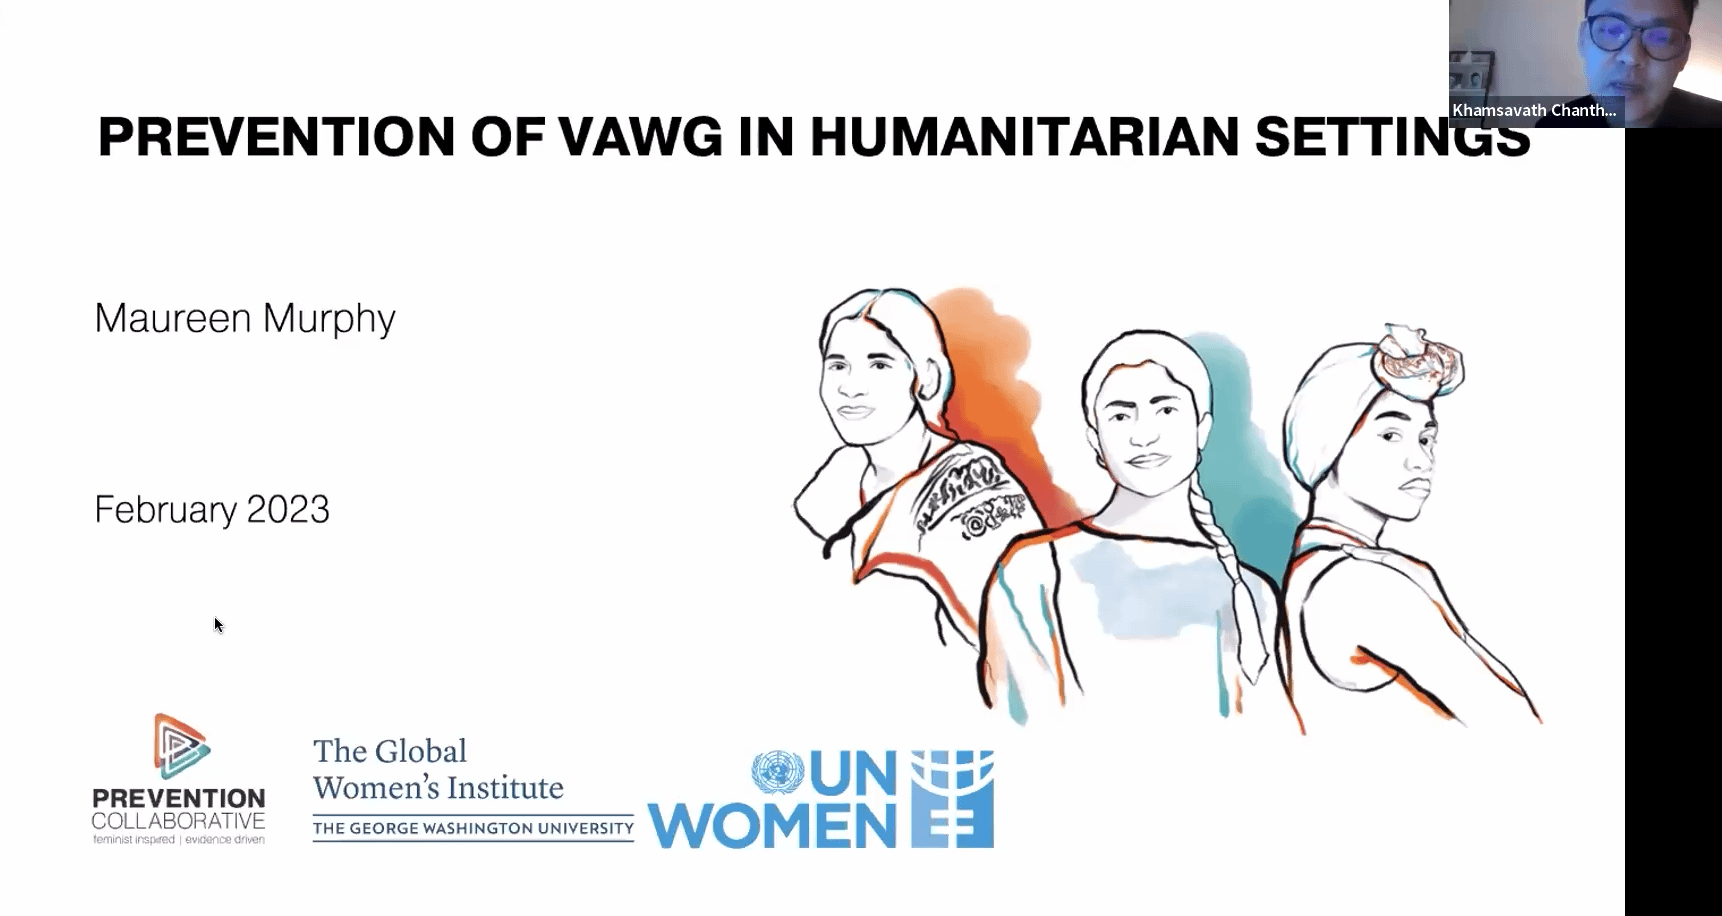 Watch The Webinar On The Prevention Of Violence Against Women And Girls In Humanitarian Settings, Co-produced By The Prevention Collaborative, The Global Women's Institute, And UN Women.